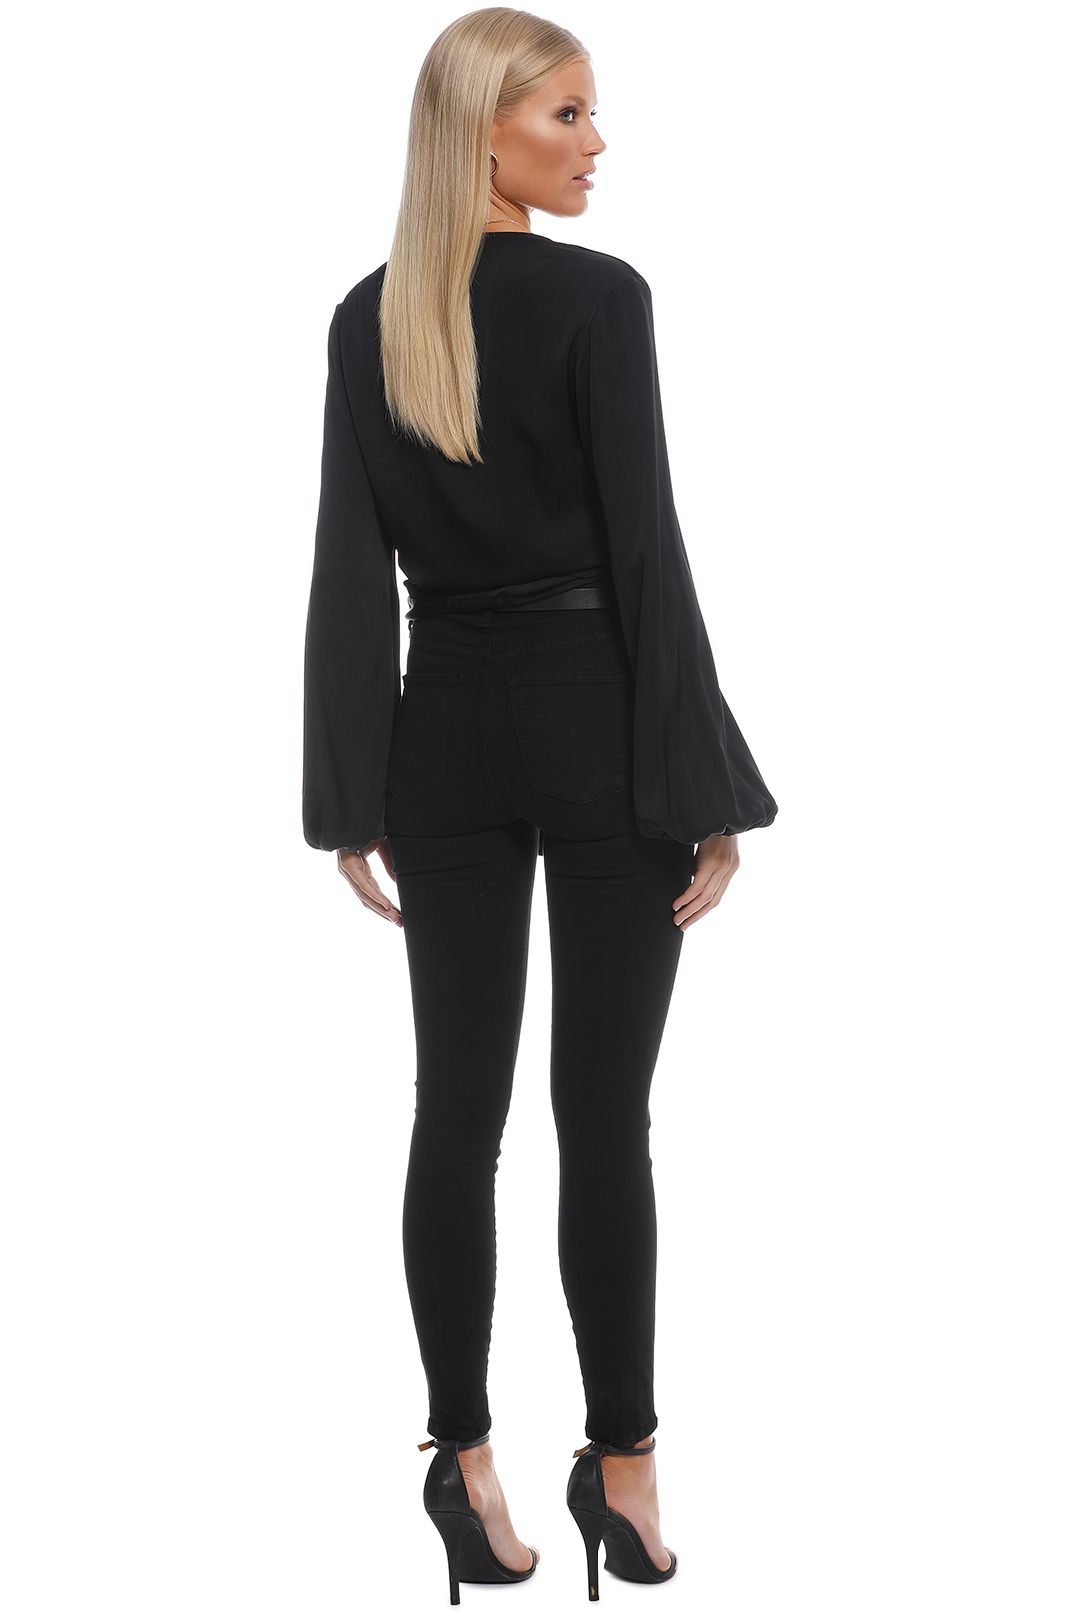 Missionary Wrap Blouse Black By Ellery For Hire Glamcorner